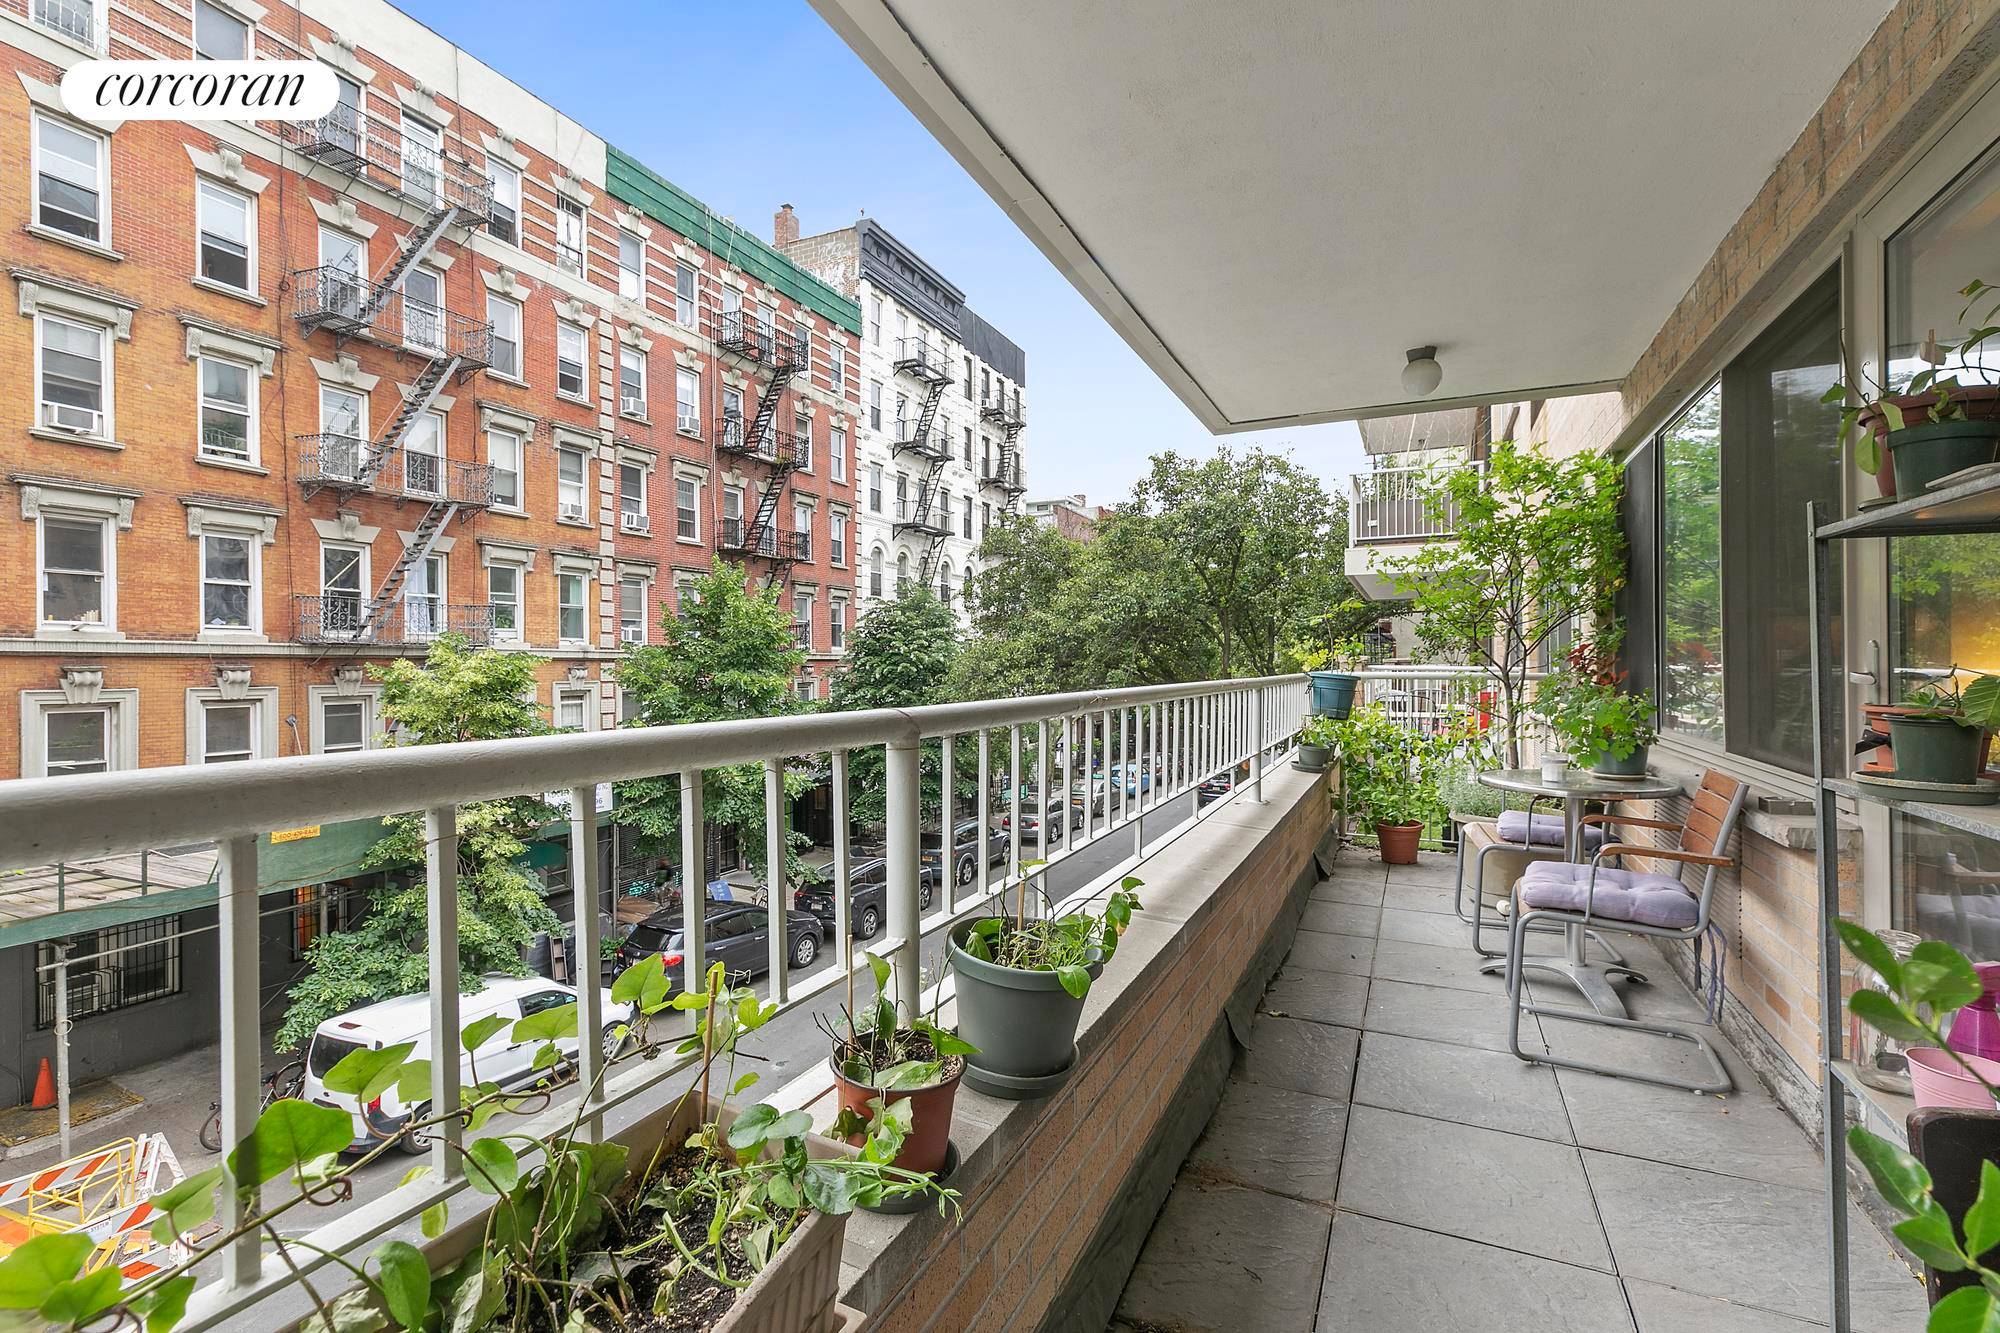 FULLY FURNISHED FOR ONE YEAR LEASECONDO APPLICATION REQUIREDJUNE 1 MOVE INThis Bright south facing one bedroom apartment with an enormous outdoor space is your new East Village home !